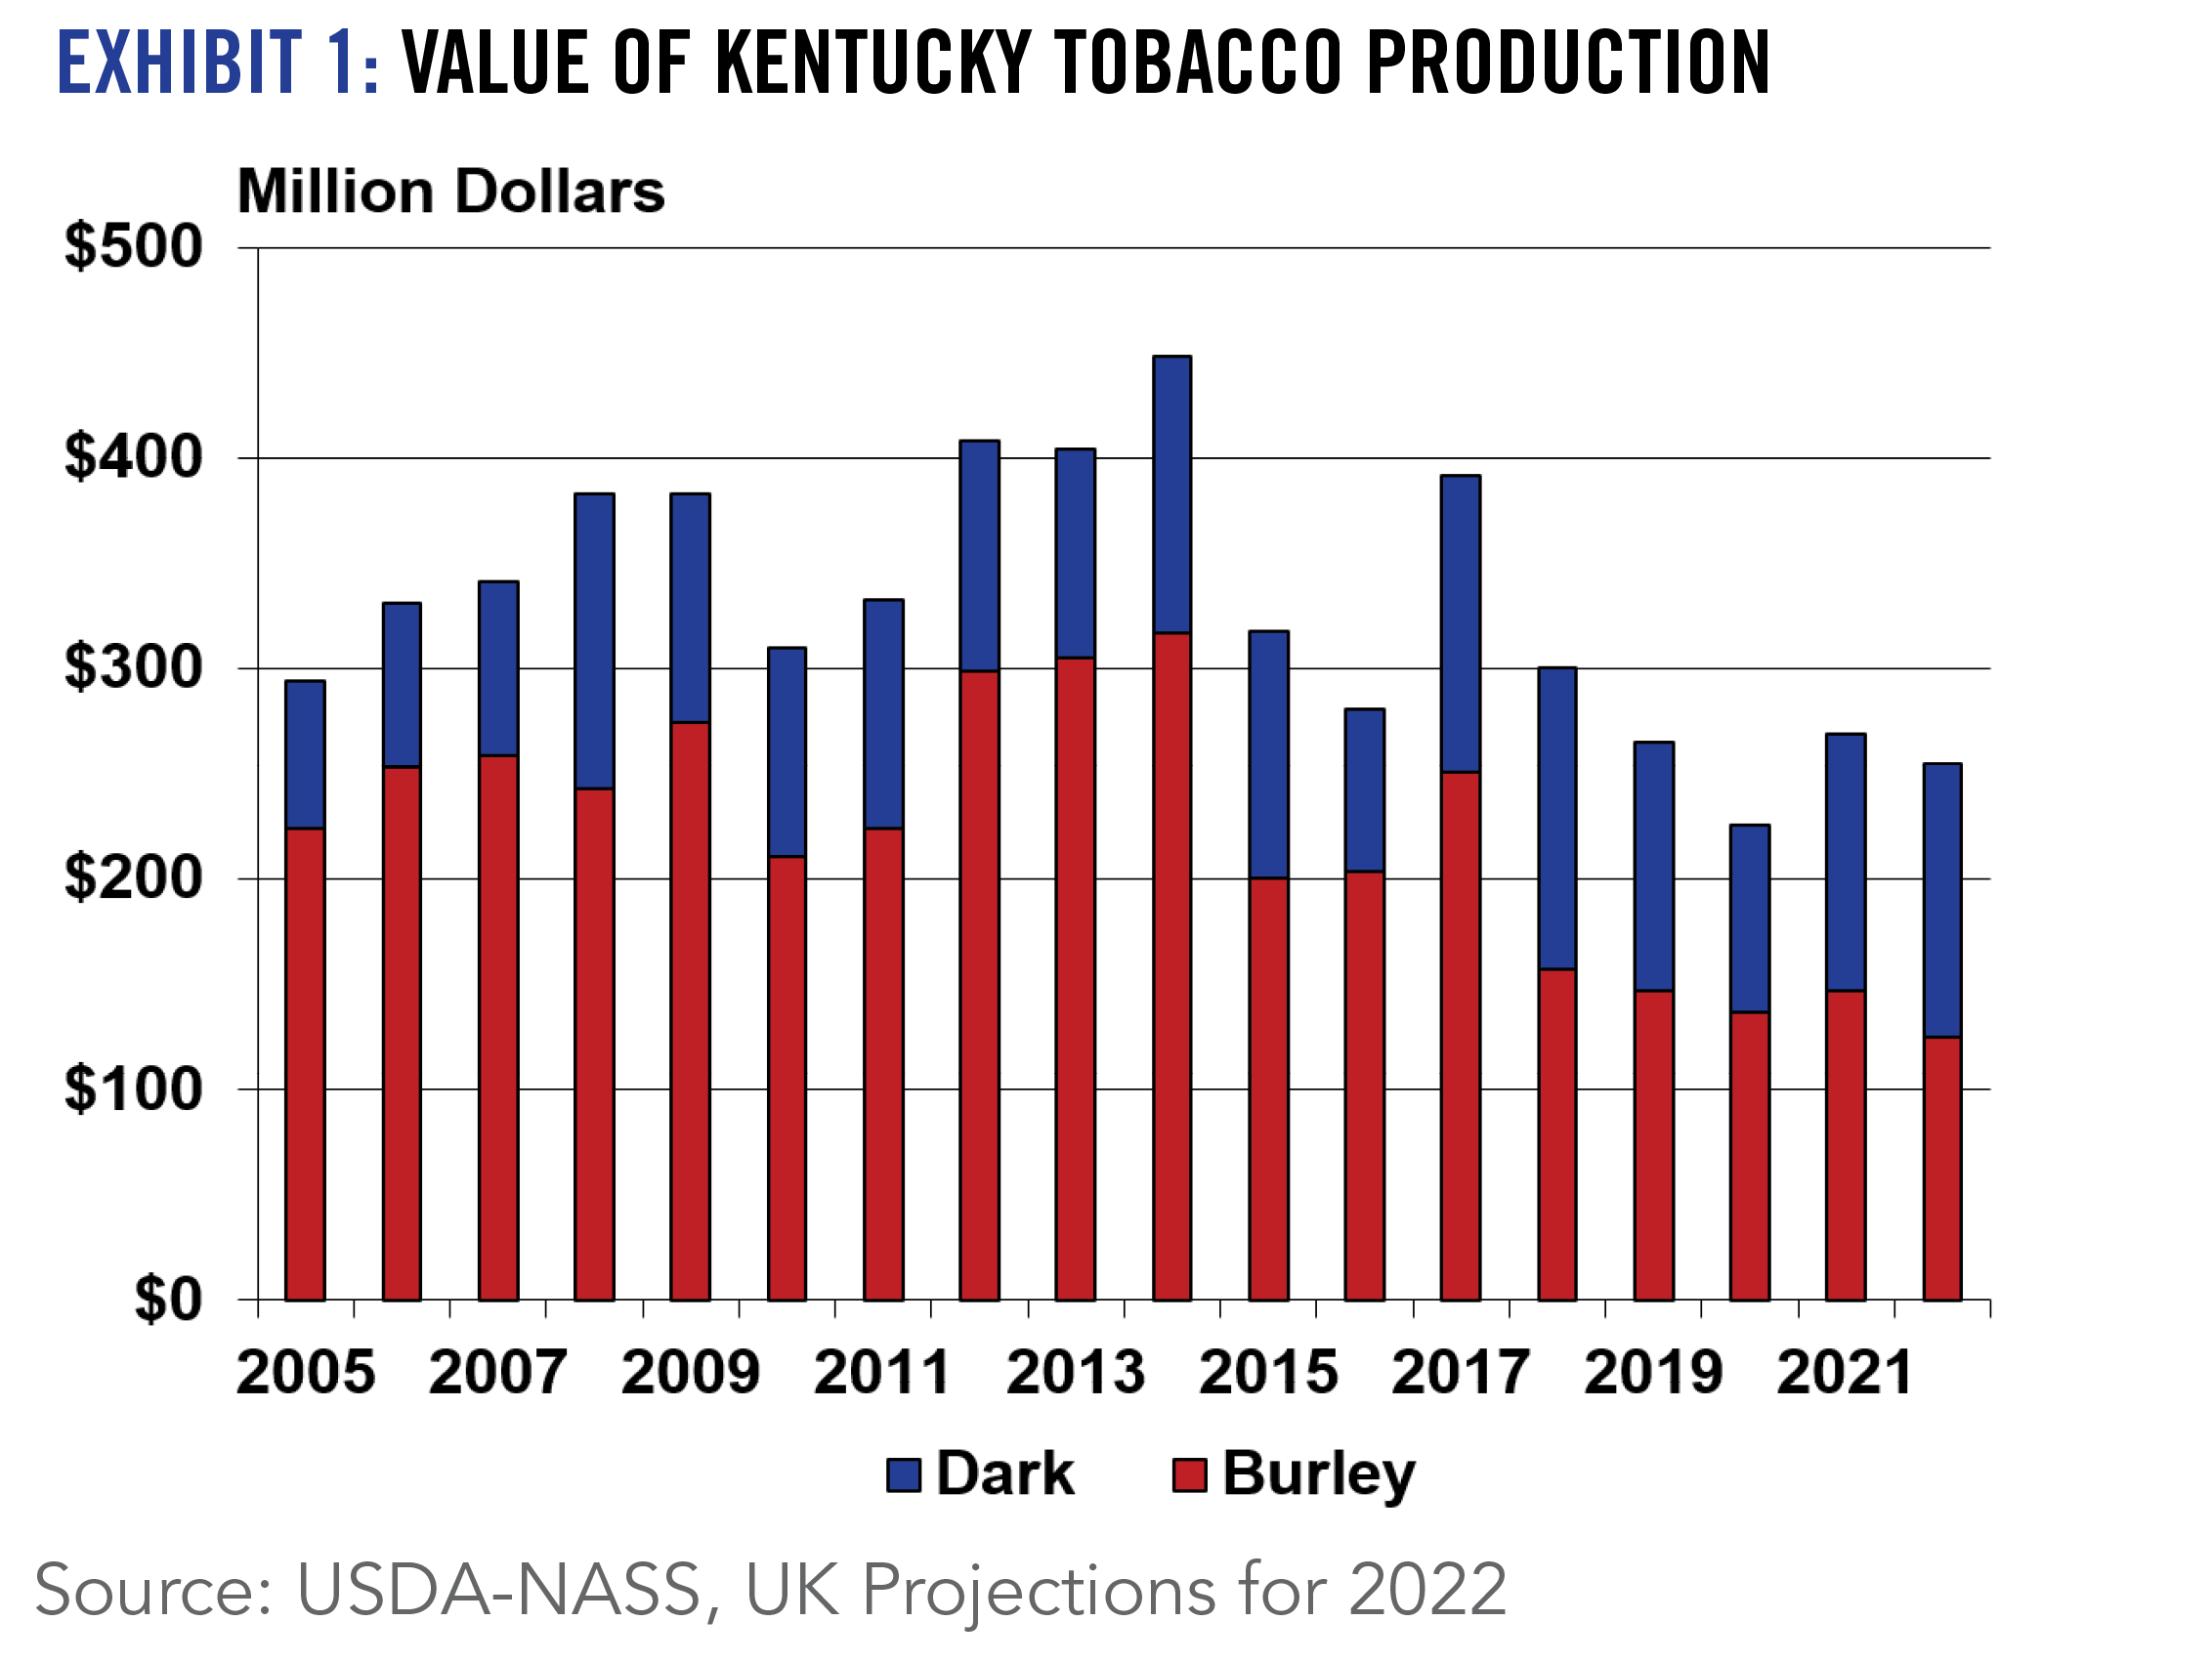 EXHIBIT 1: VALUE OF KENTUCKY TOBACCO PRODUCTION